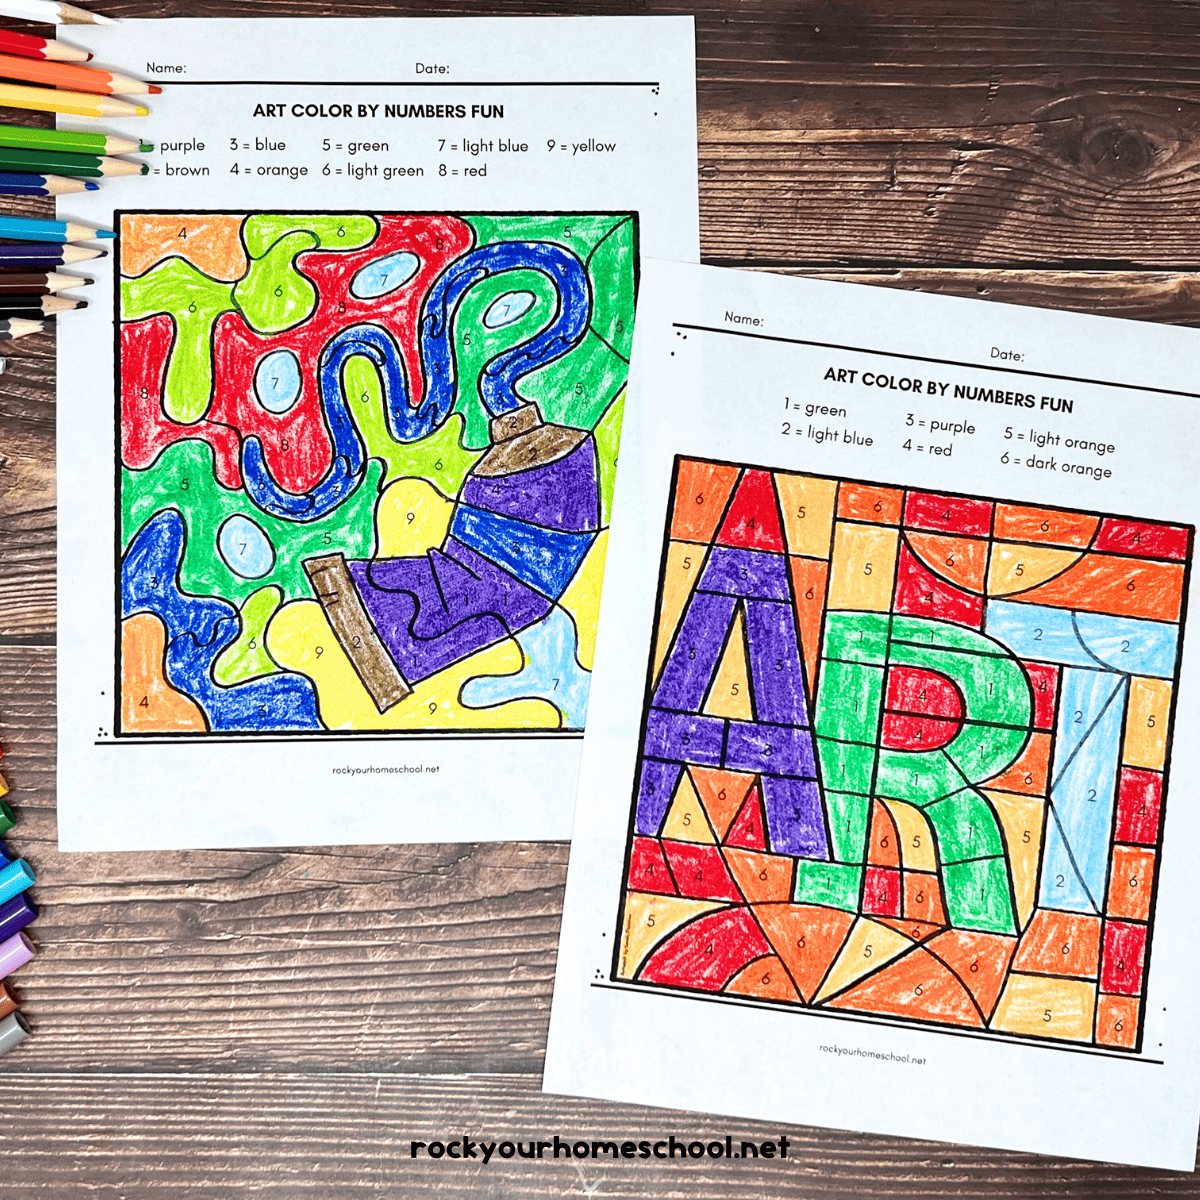 Art Color By Number Pages For Fun Activities (6 Free)